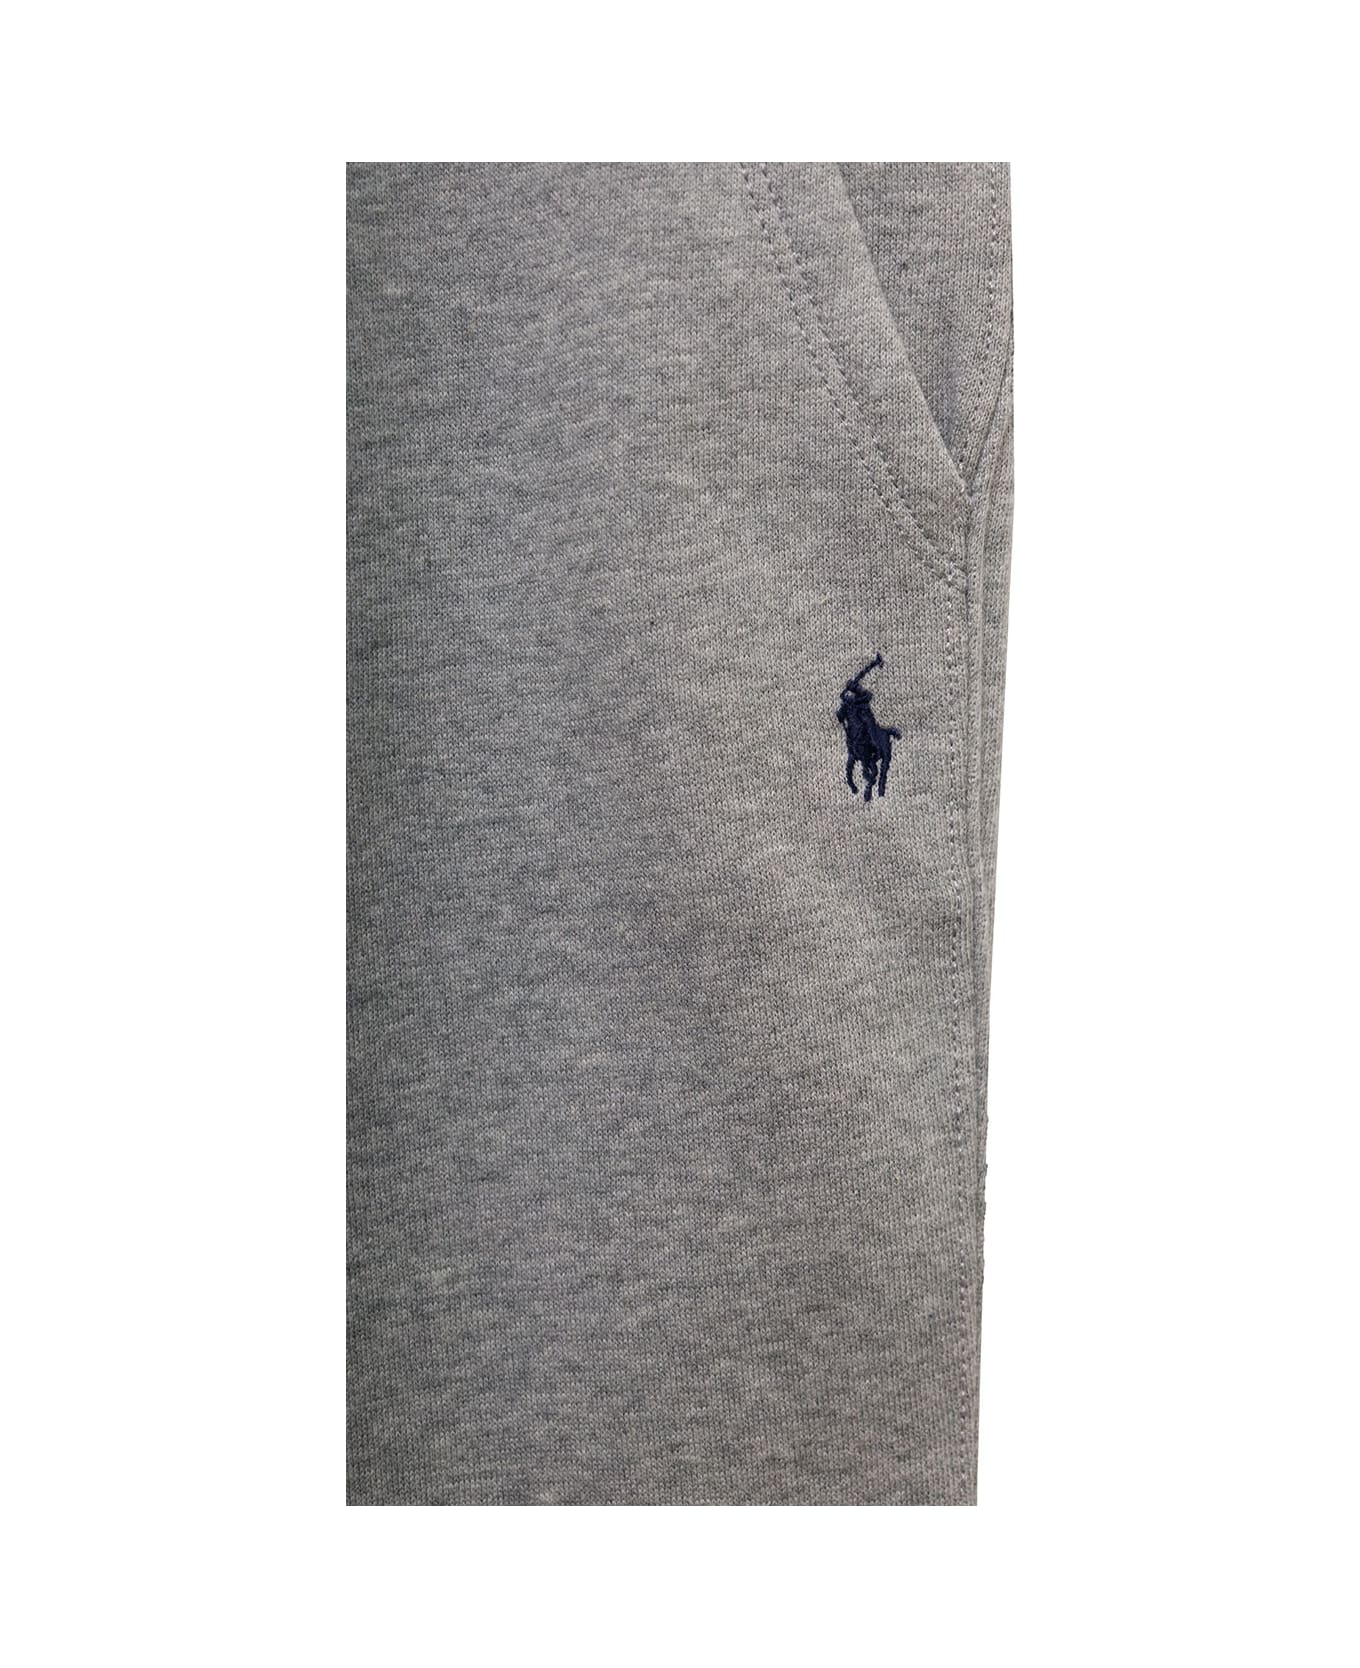 Ralph Lauren Grey Jogger Pants With Logo Embroidery And Drawstring In Cotton Blend Boy